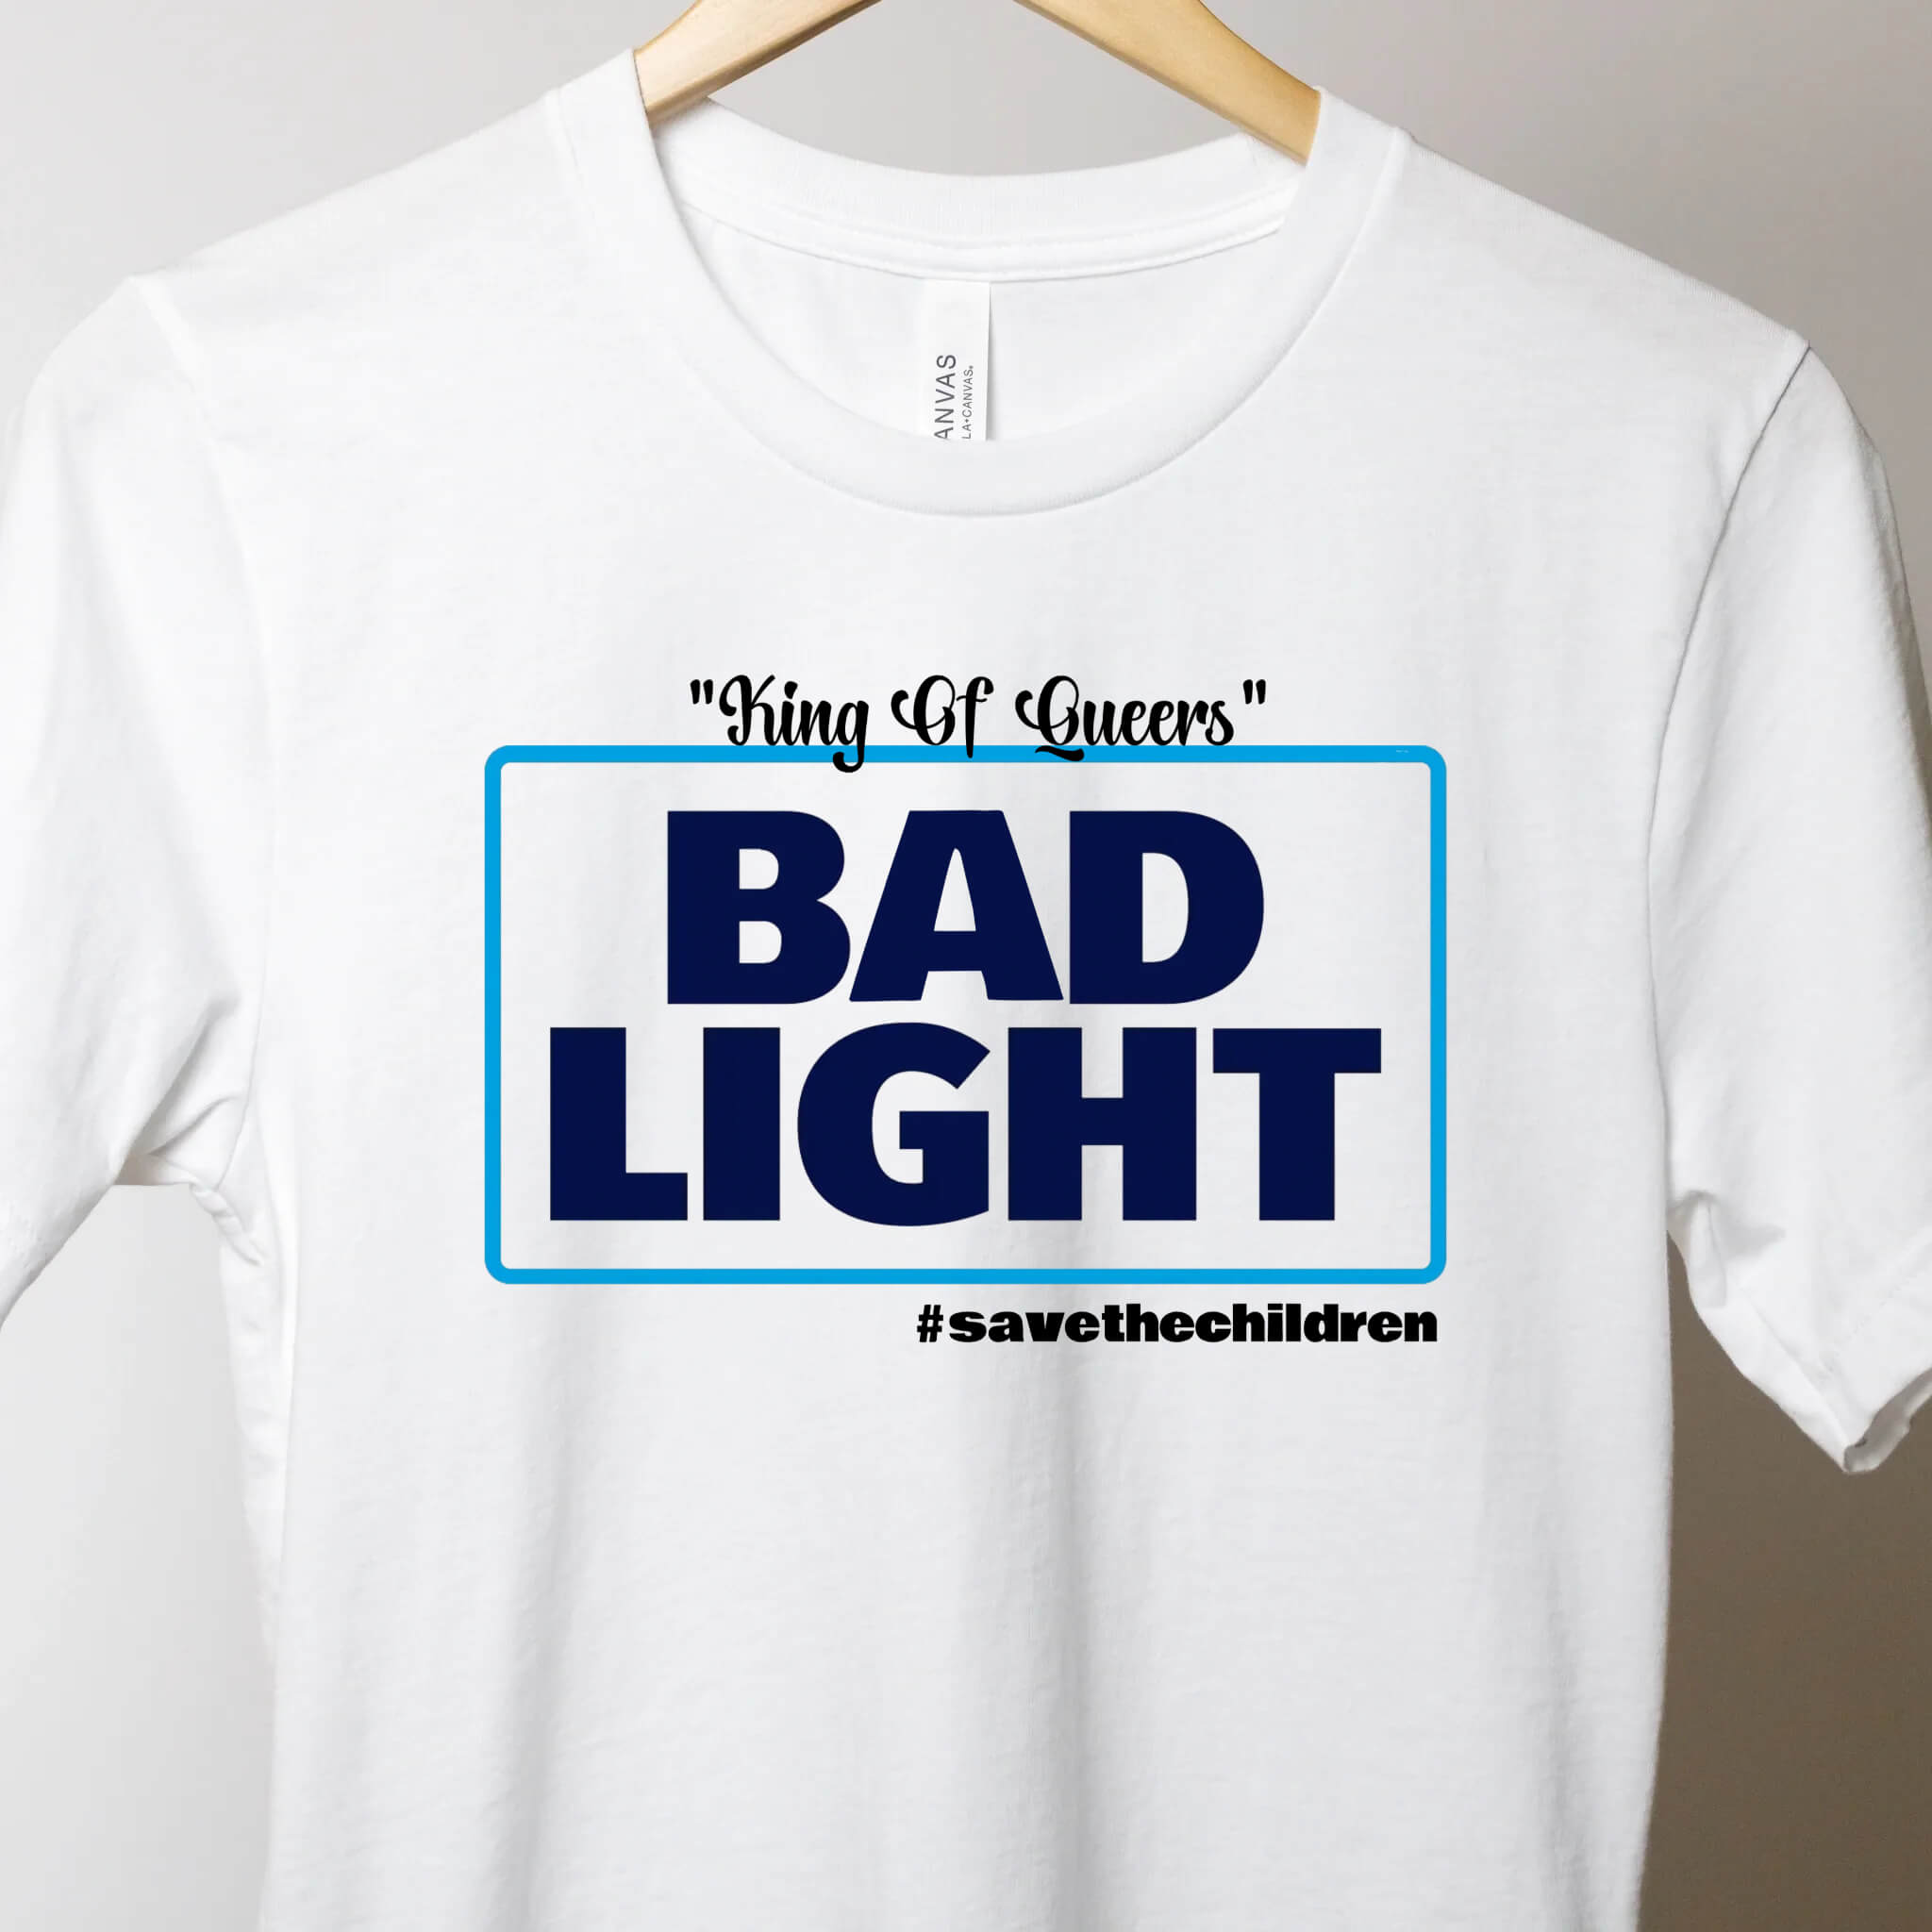 Stop Groomers, Bad Light King of Queers, Stop Targeting Our Kids, Boycott Bud Light, Cancel Bud Light, Bud Light, Save The Children Adult T-Shirt